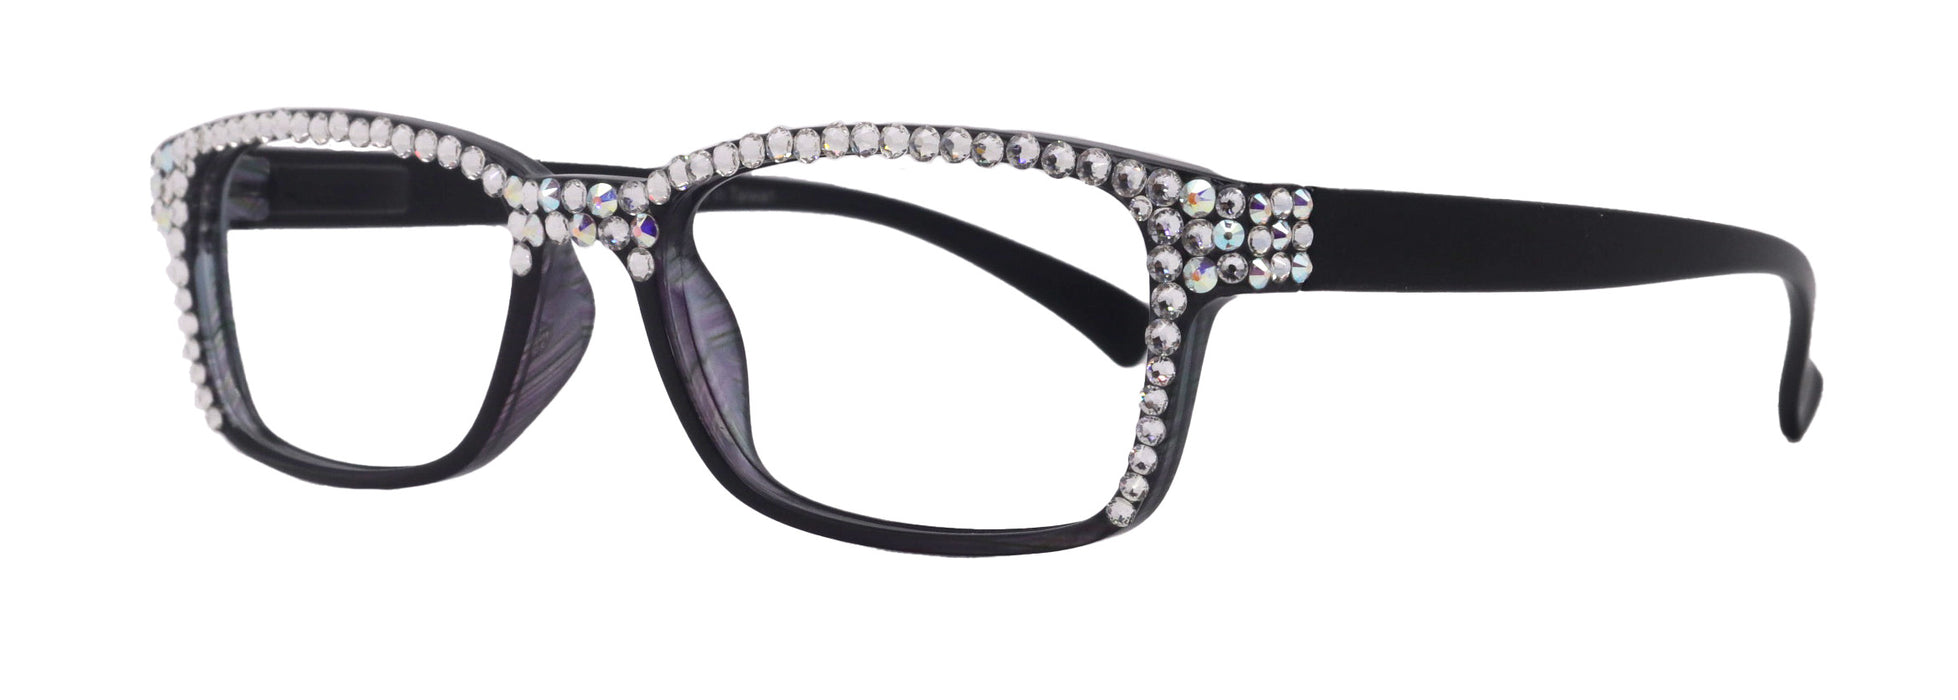 Olivia, (Bling) Women Reading Glasses Adorned with (Full Top) (Clear) Genuine European Crystals.  (Black, Grey) Square, NY fifth avenue.